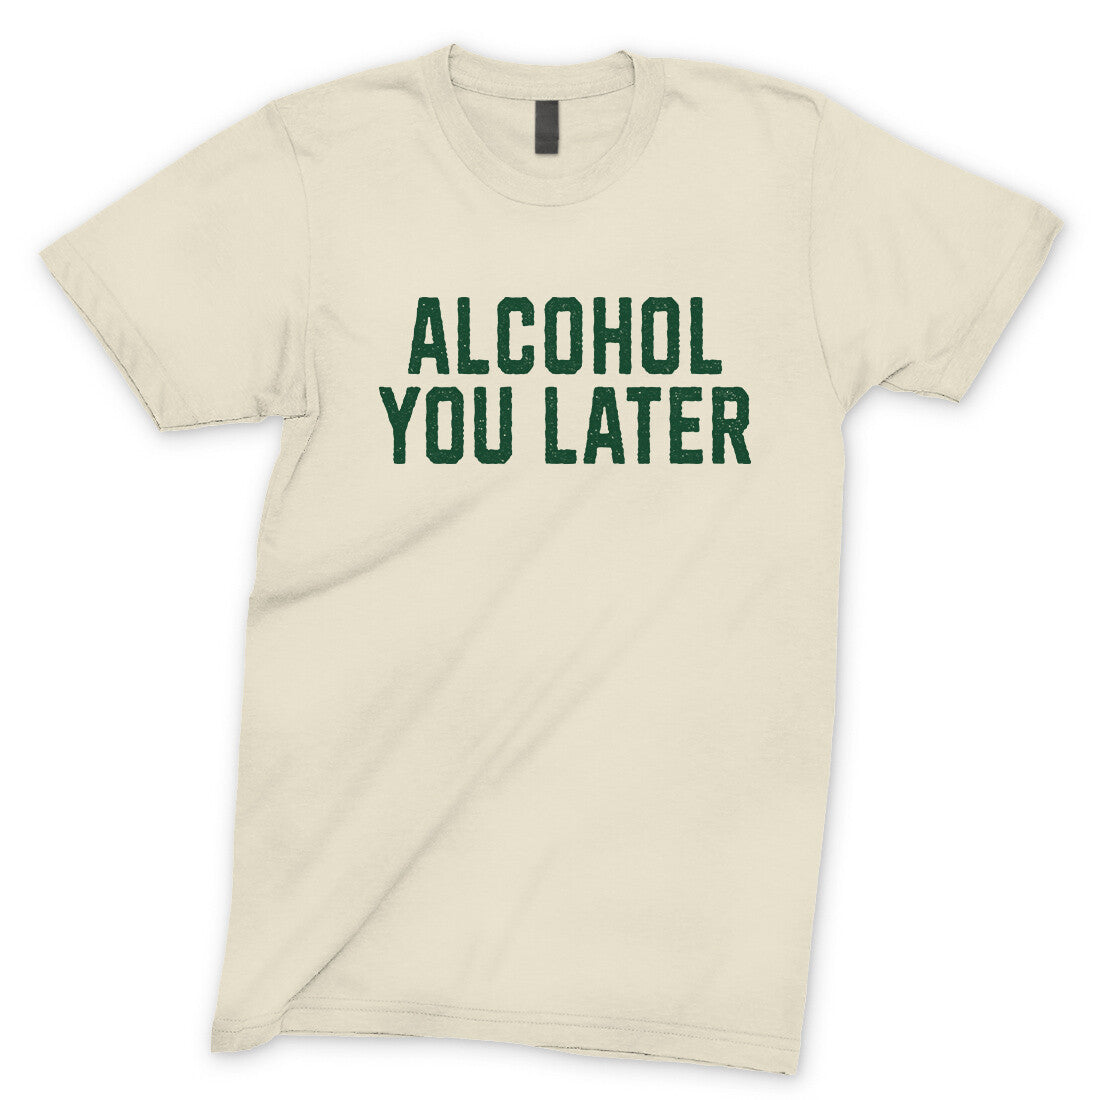 Alcohol You Later in Natural Color